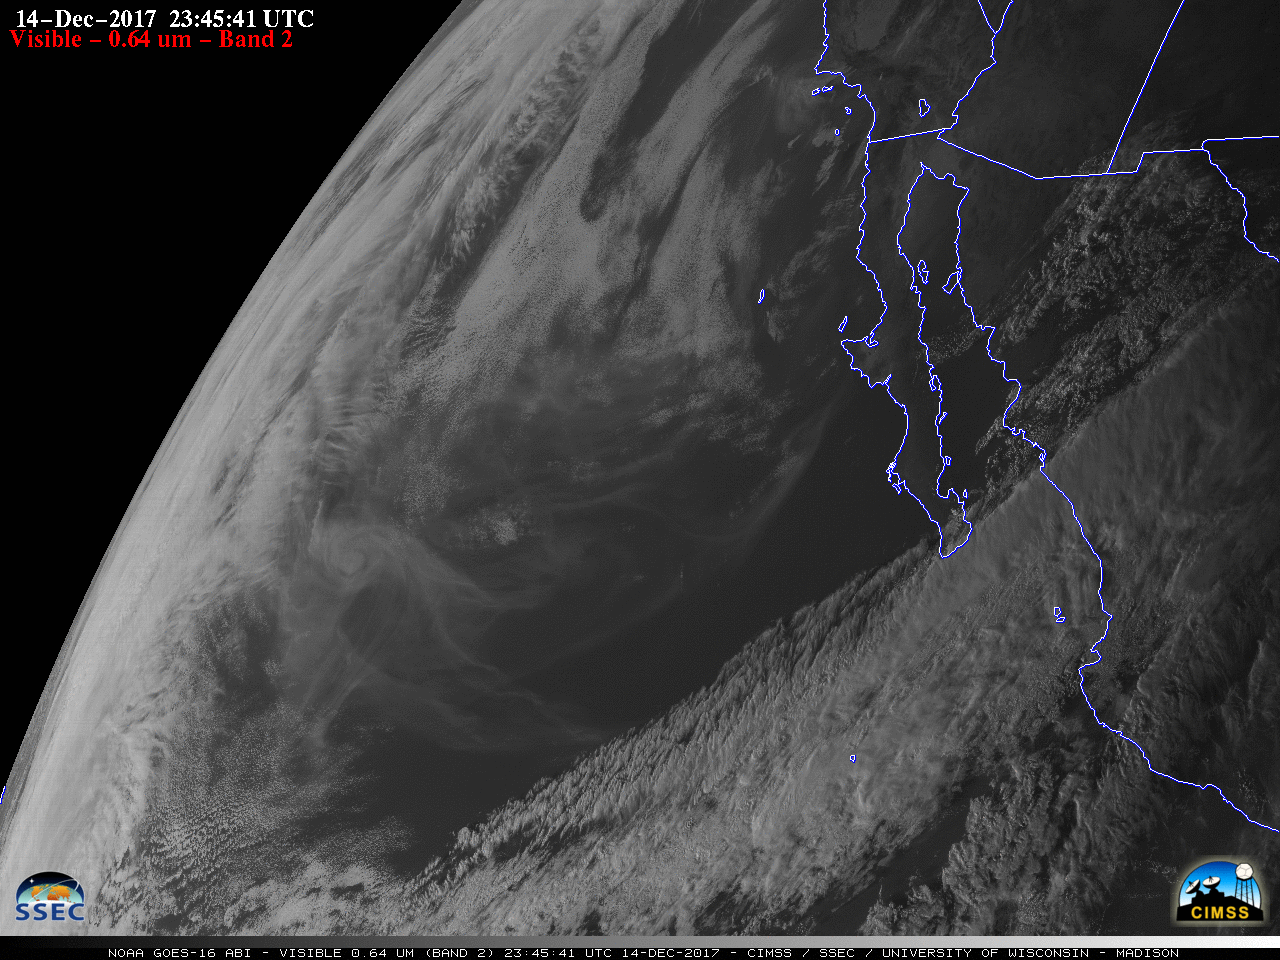 GOES-16 Visible (0.64 µm) images [click to play animation]